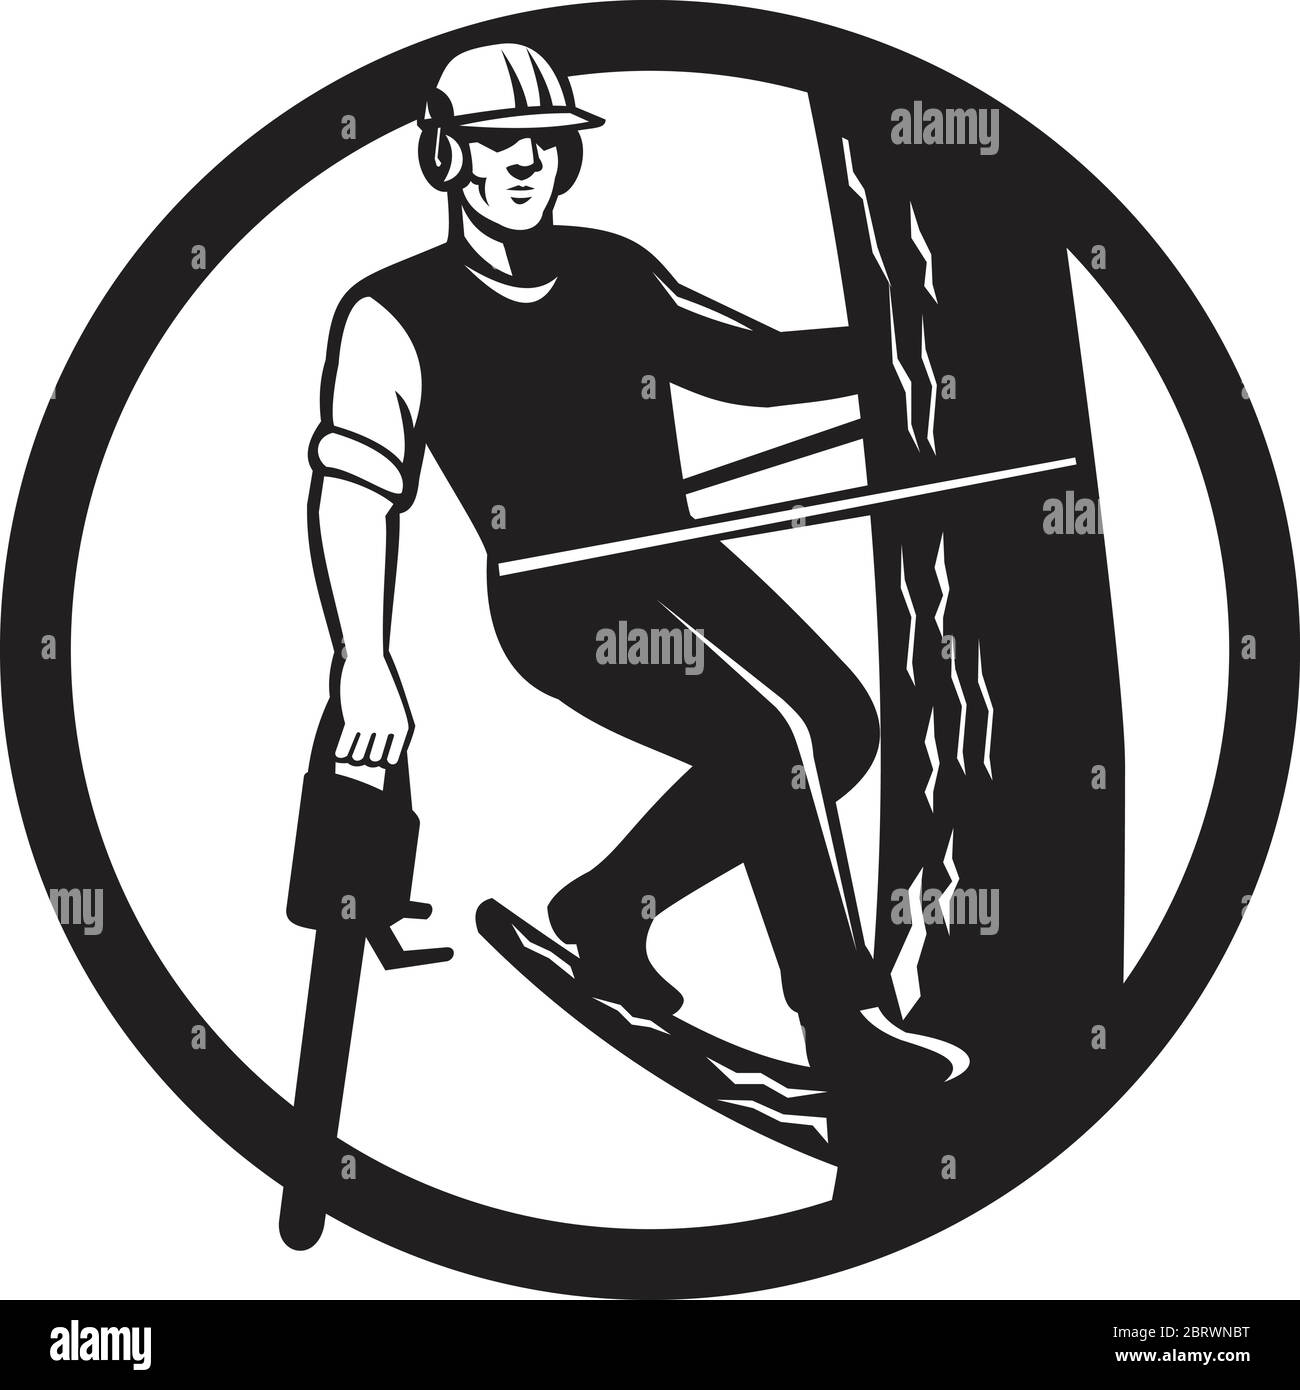 Black and White Icon retro style illustration of tree surgeon, arborist, or arboriculturist, holding chainsaw trimming a tree set inside in circle on Stock Vector